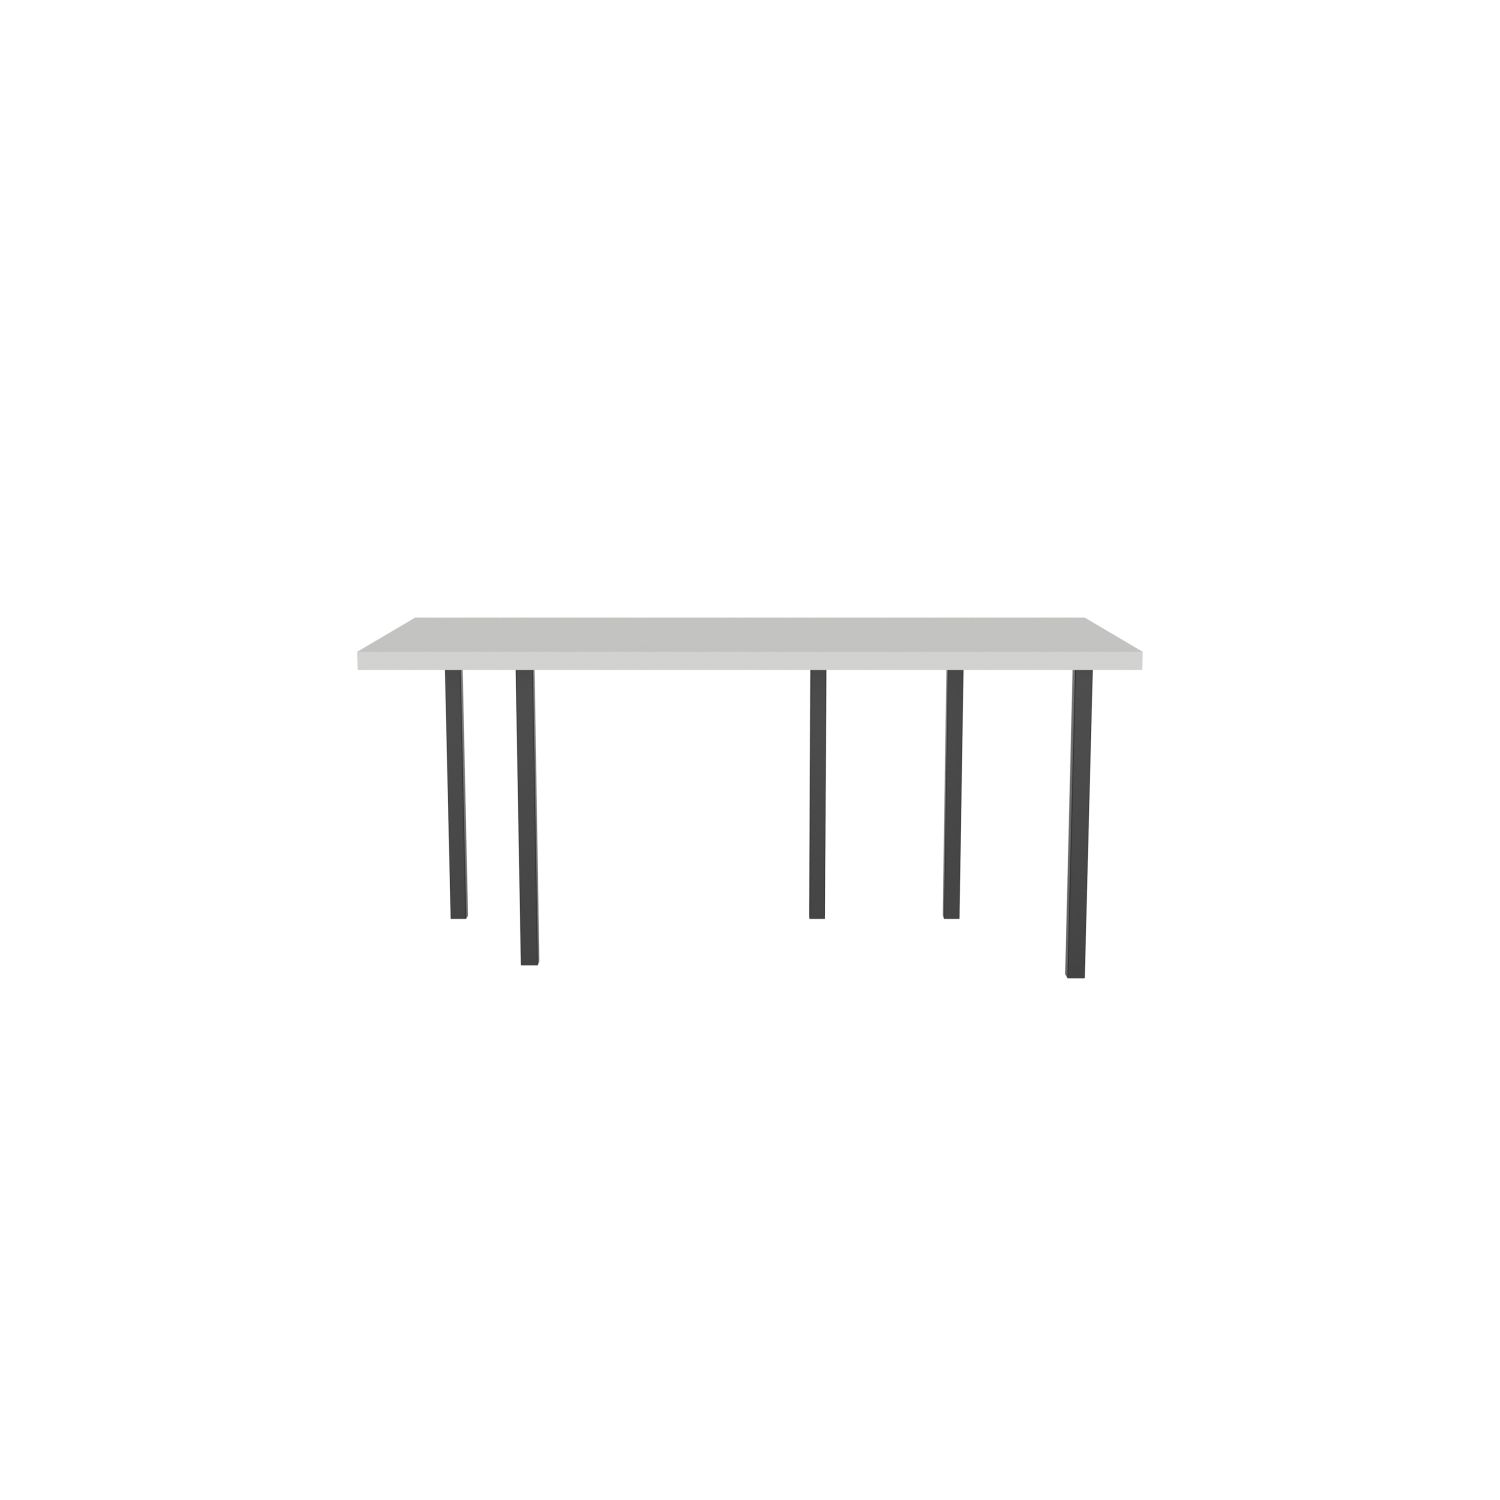 lensvelt bbrand table five fixed heigt 80x172 hpl white 50 mm price level 1 black ral9005